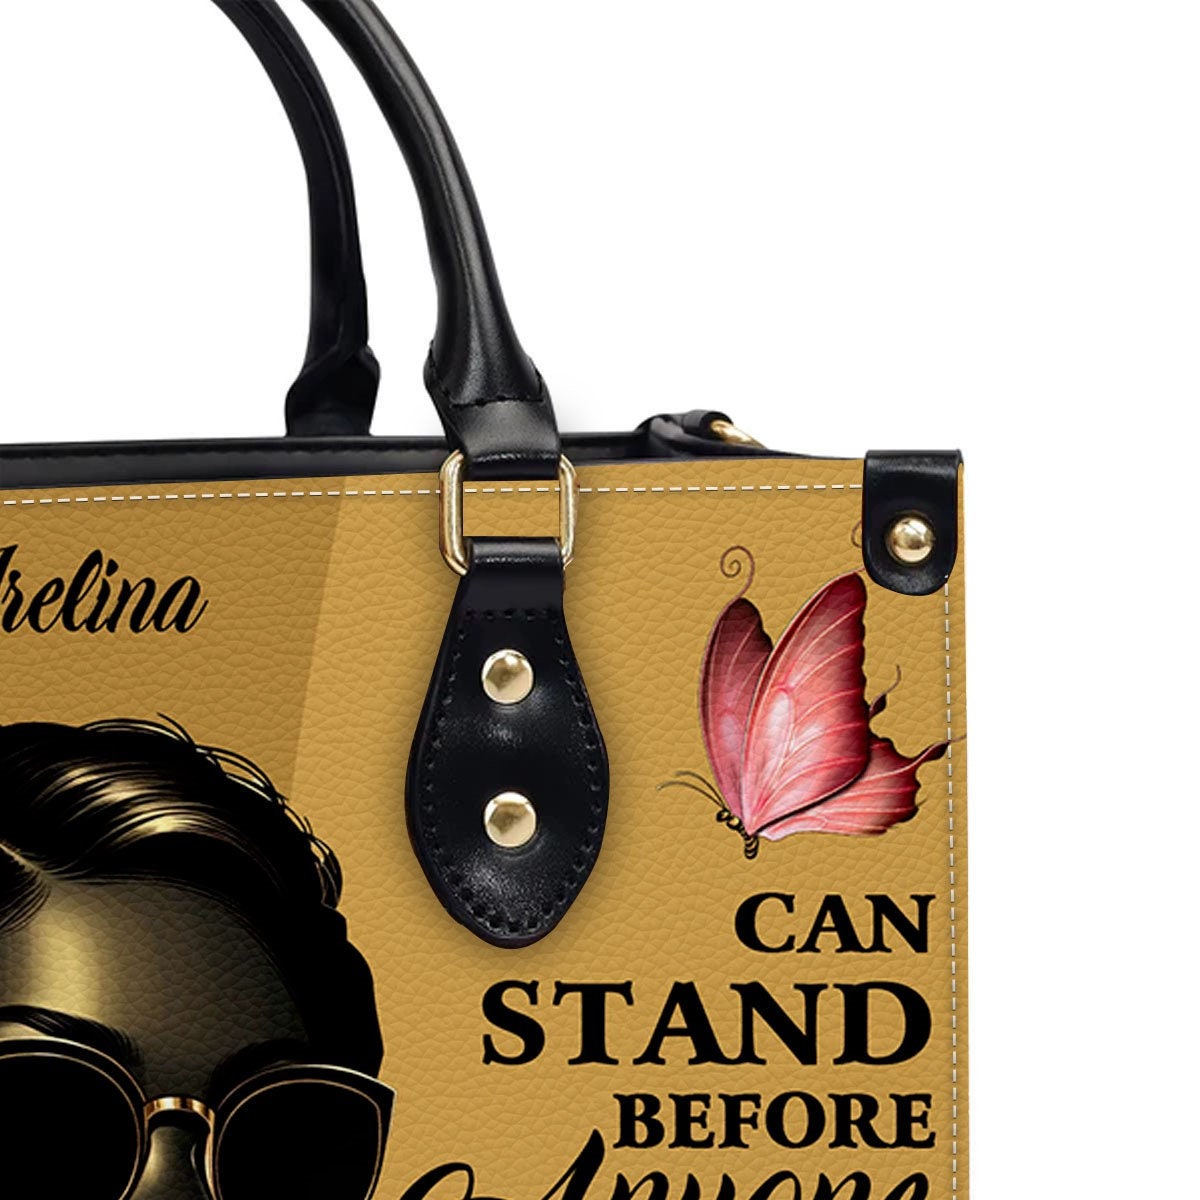 Personalized Empowerment Leather Handbag - Stand Boldly